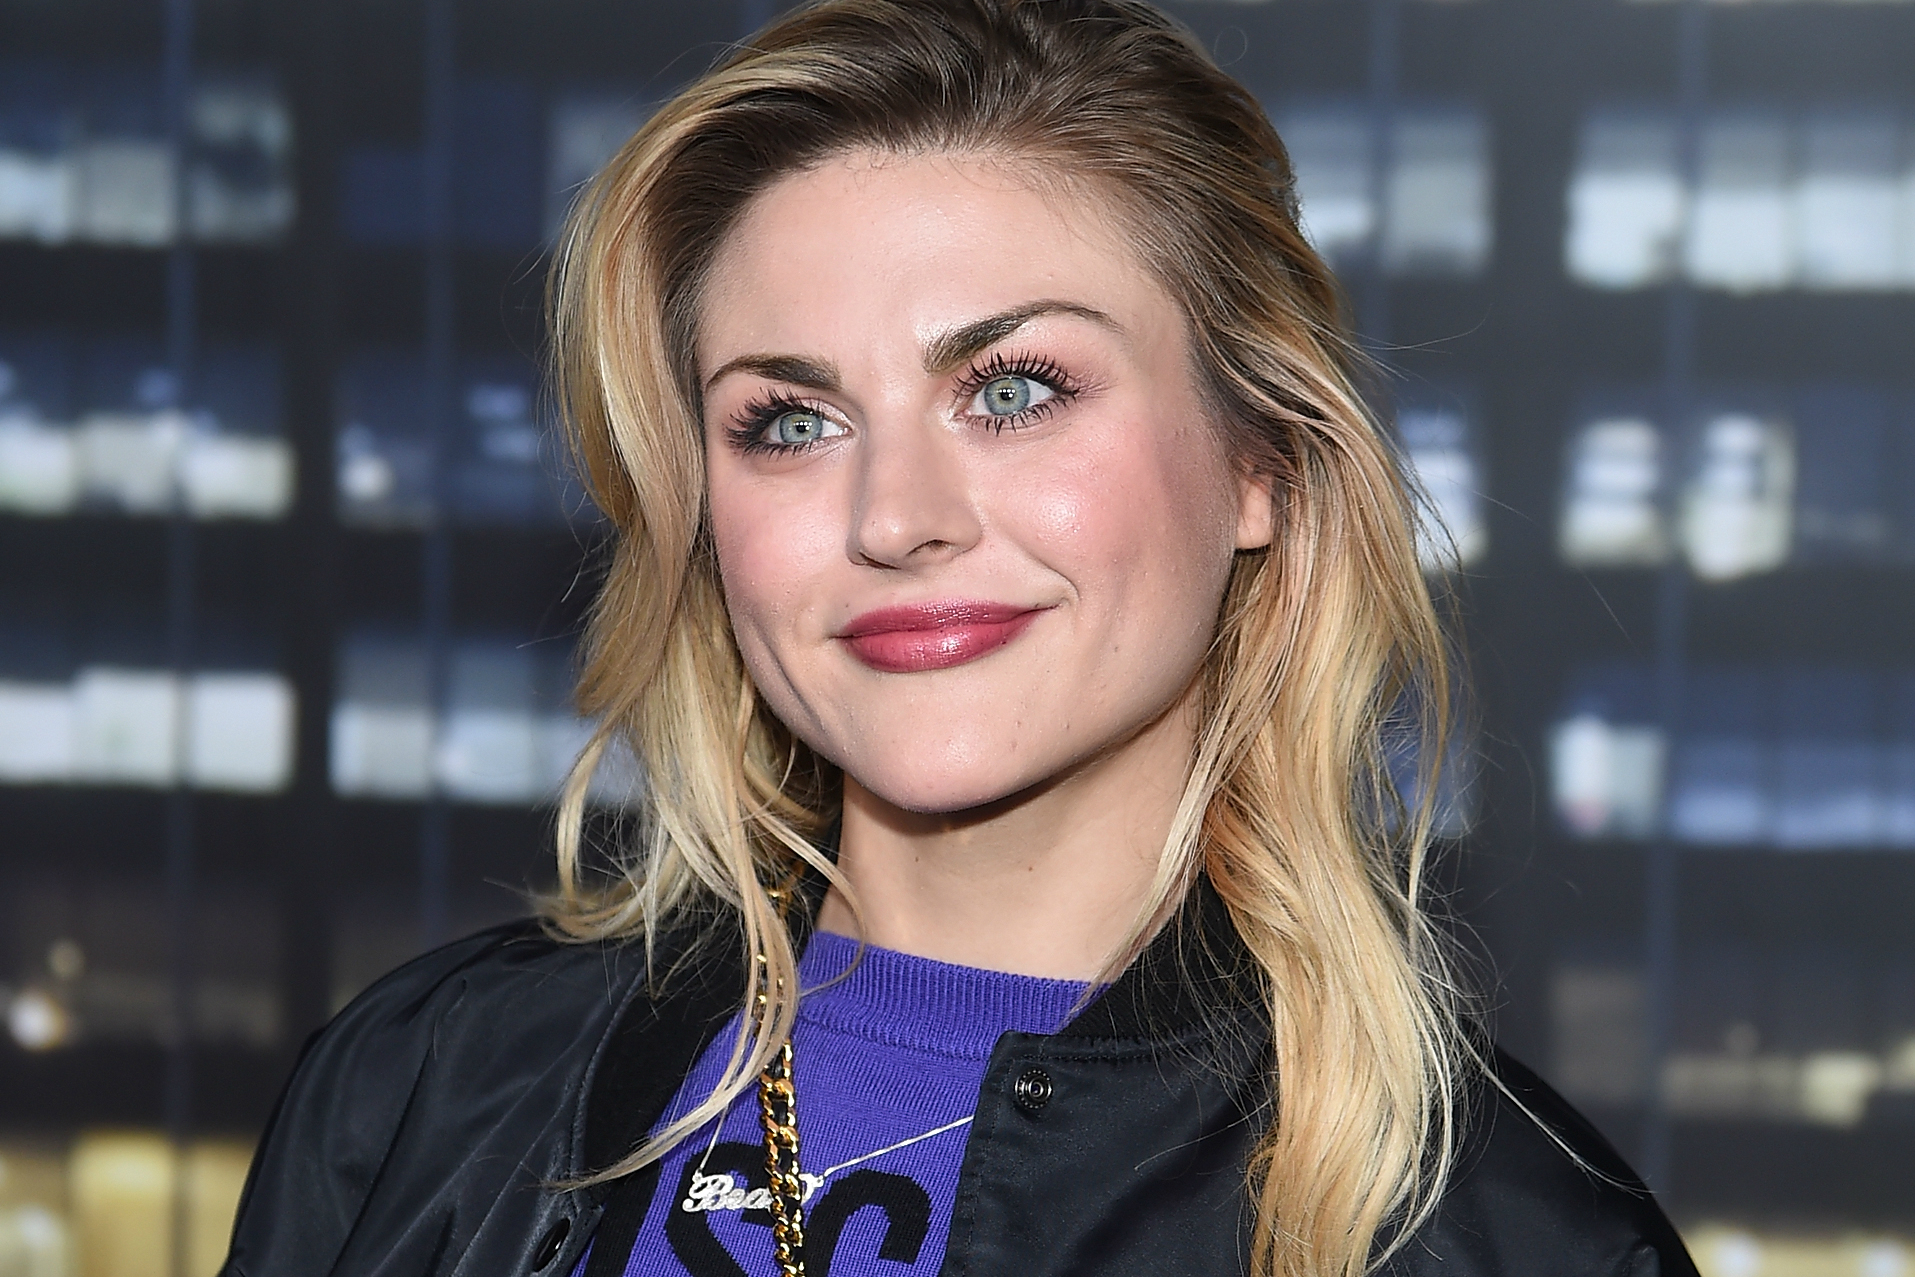 frances bean cobain can't tell rupaul about record deal rumors